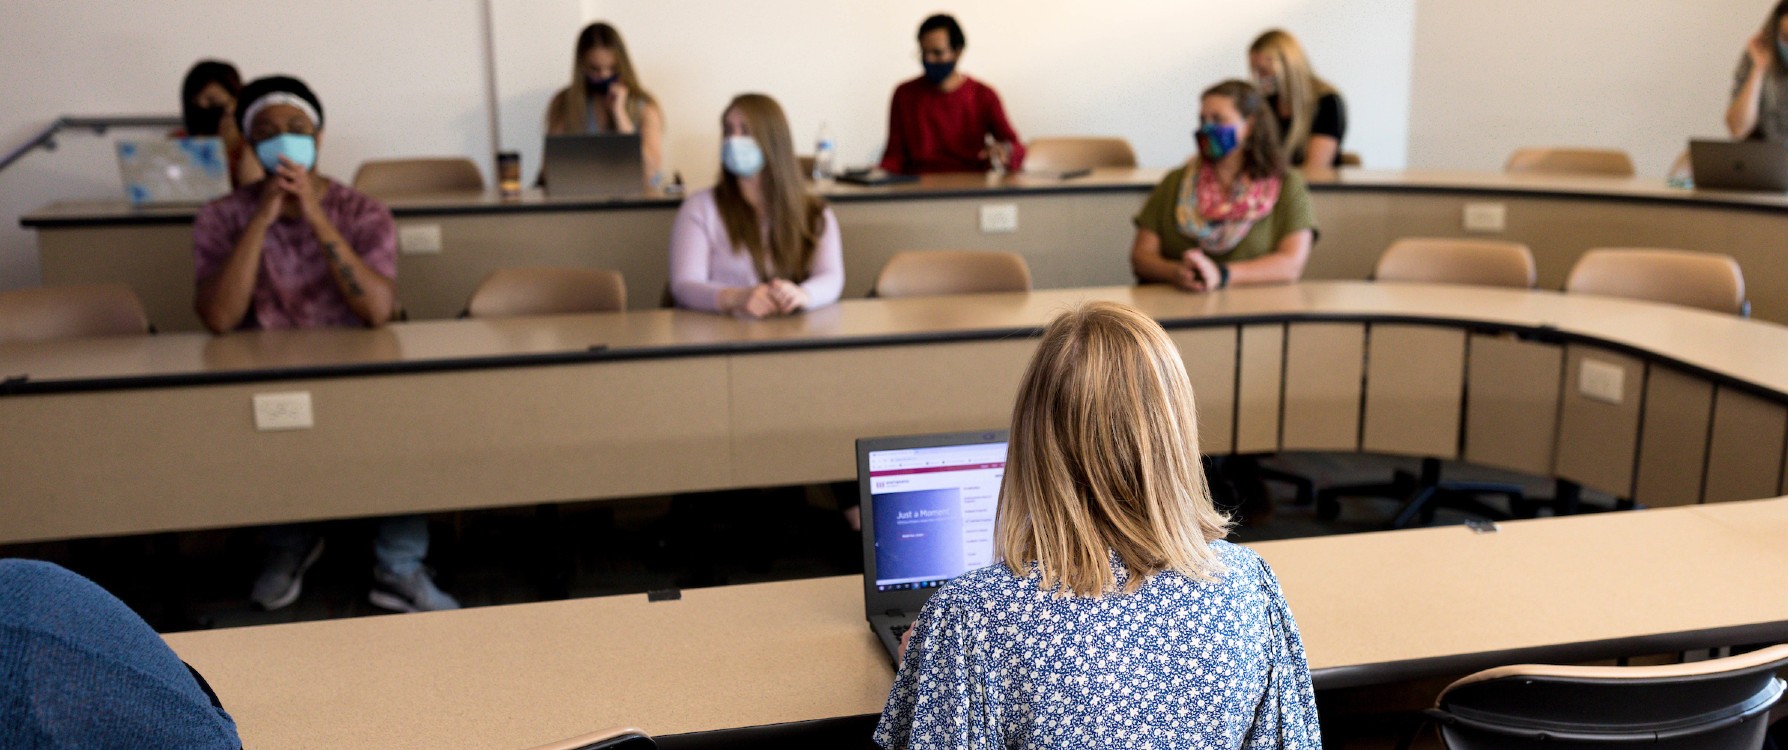 Students wearing masks and sitting in a classroom, with one person at a laptop facing them, leading the discussion.